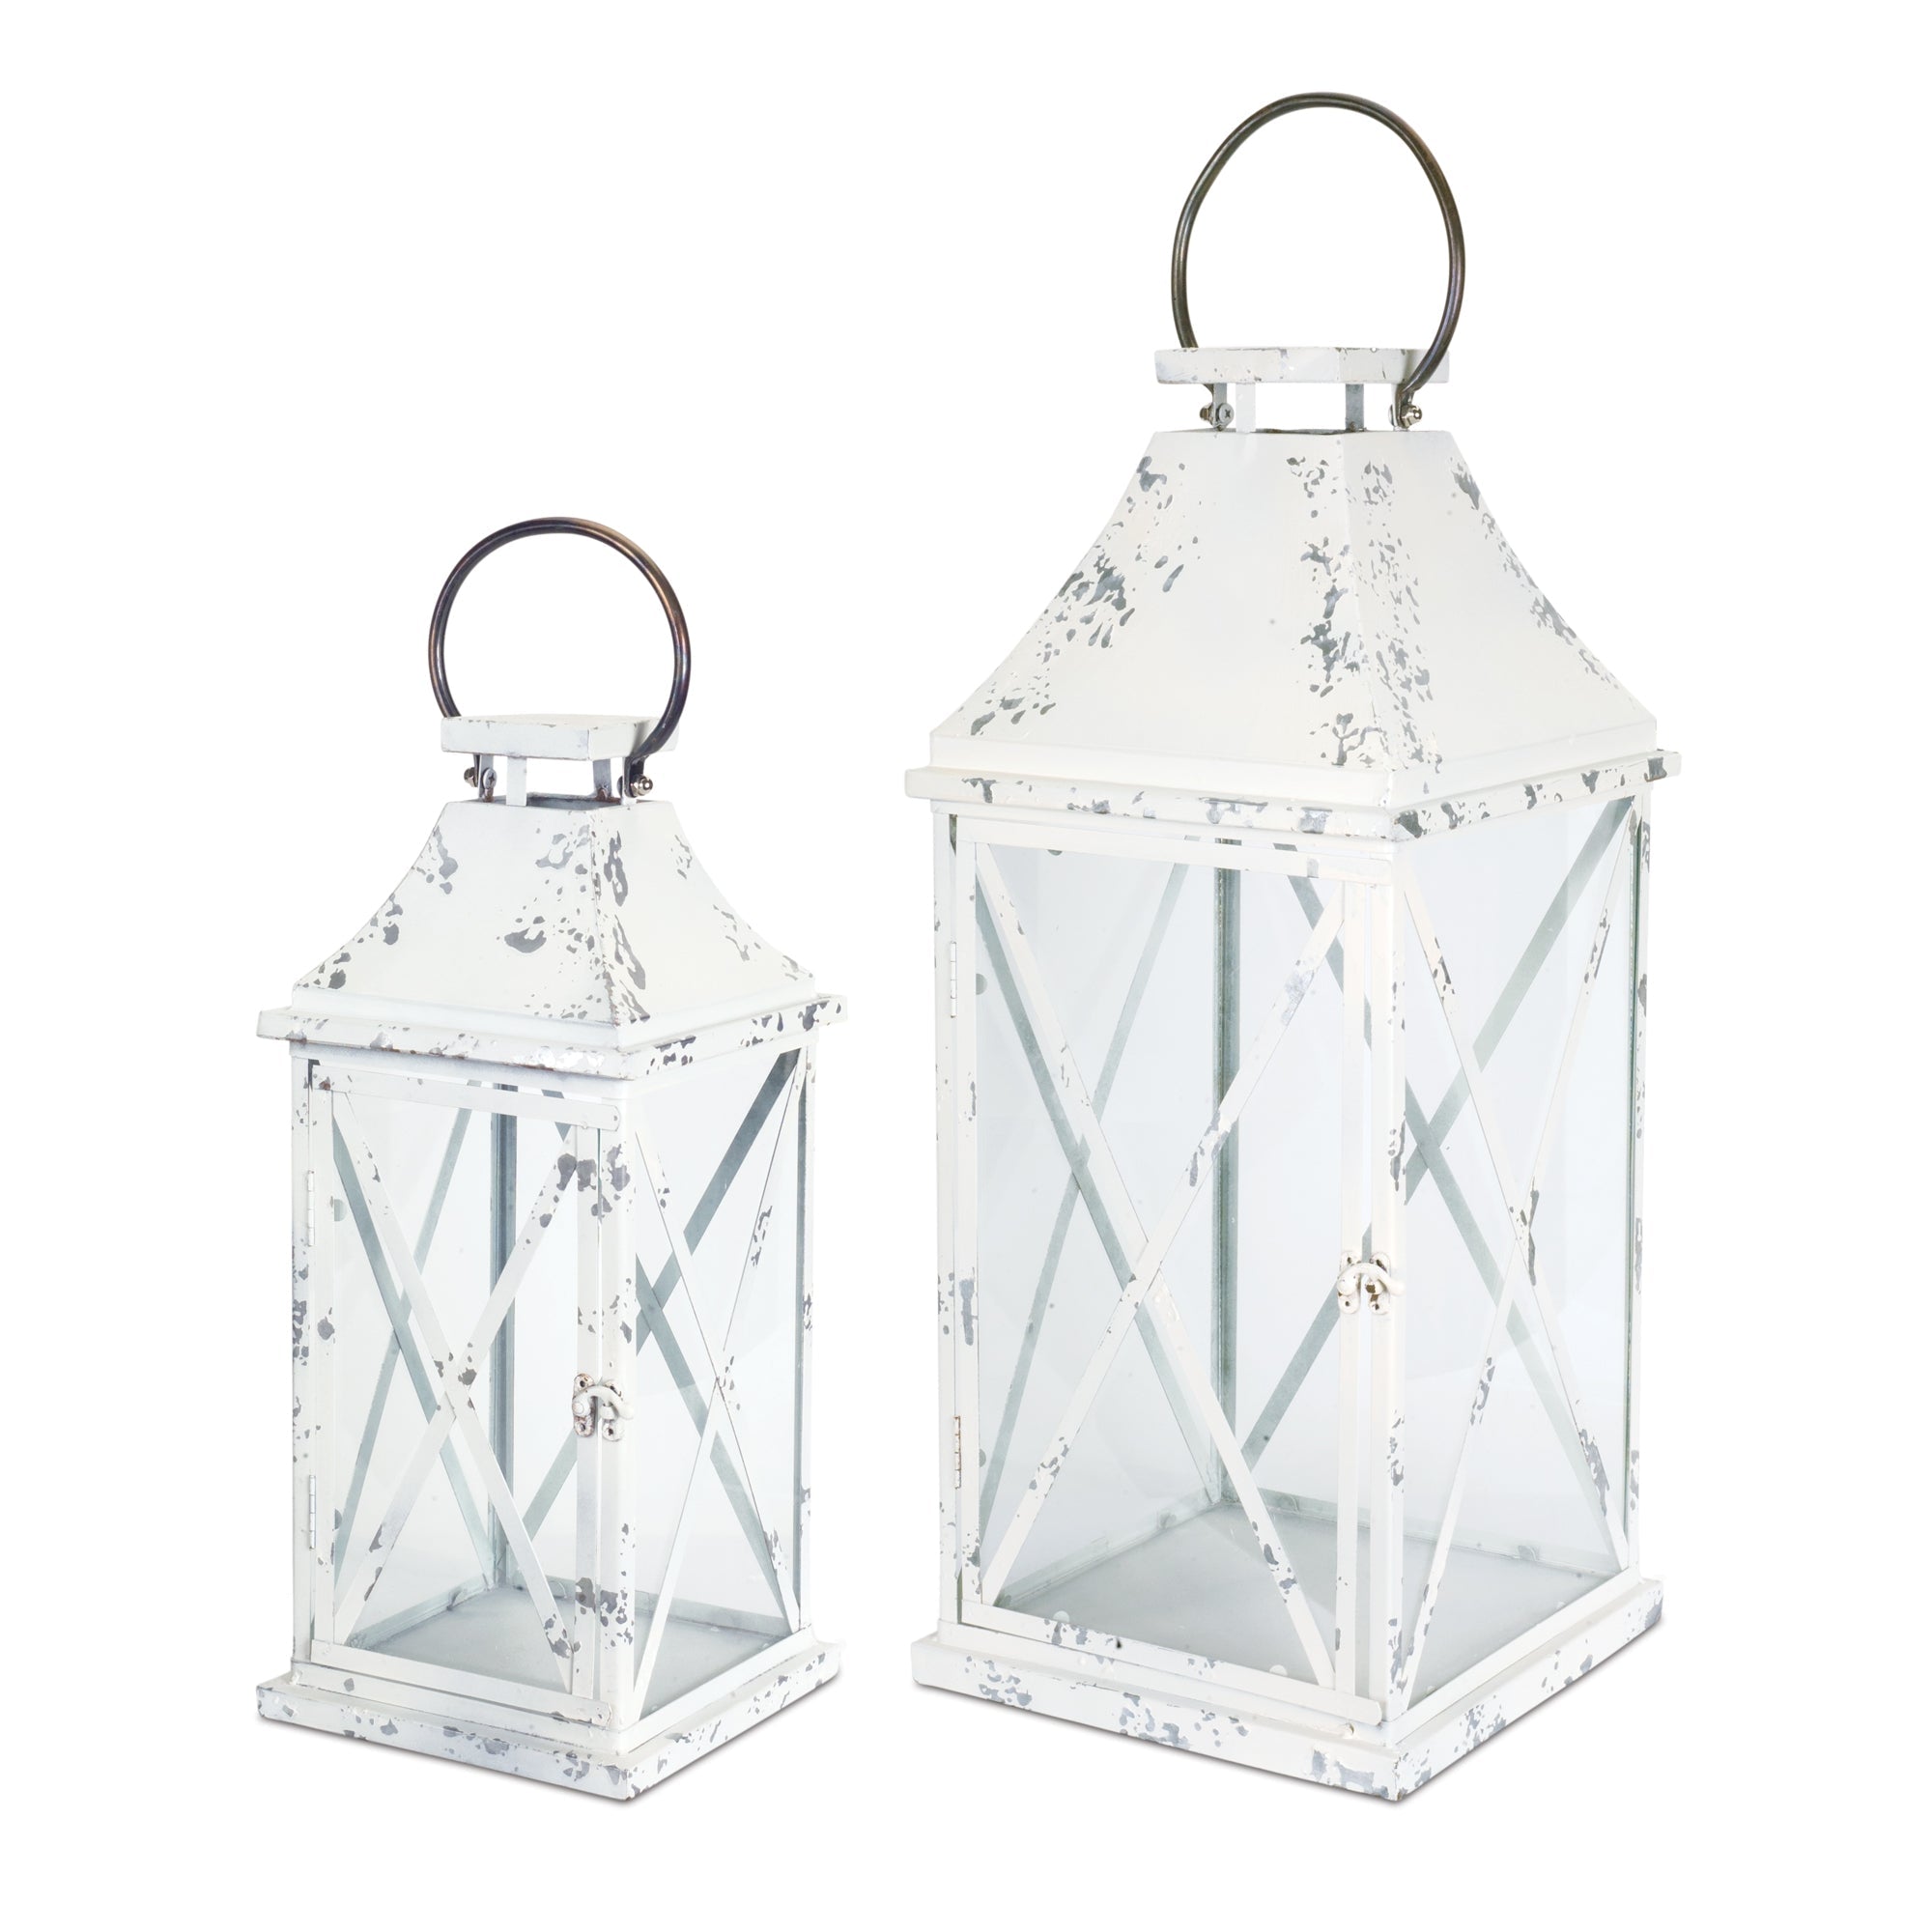 Set-Of-Two-White-Flameless-Floor-Lantern-Candle-Holder-Candle-Holders